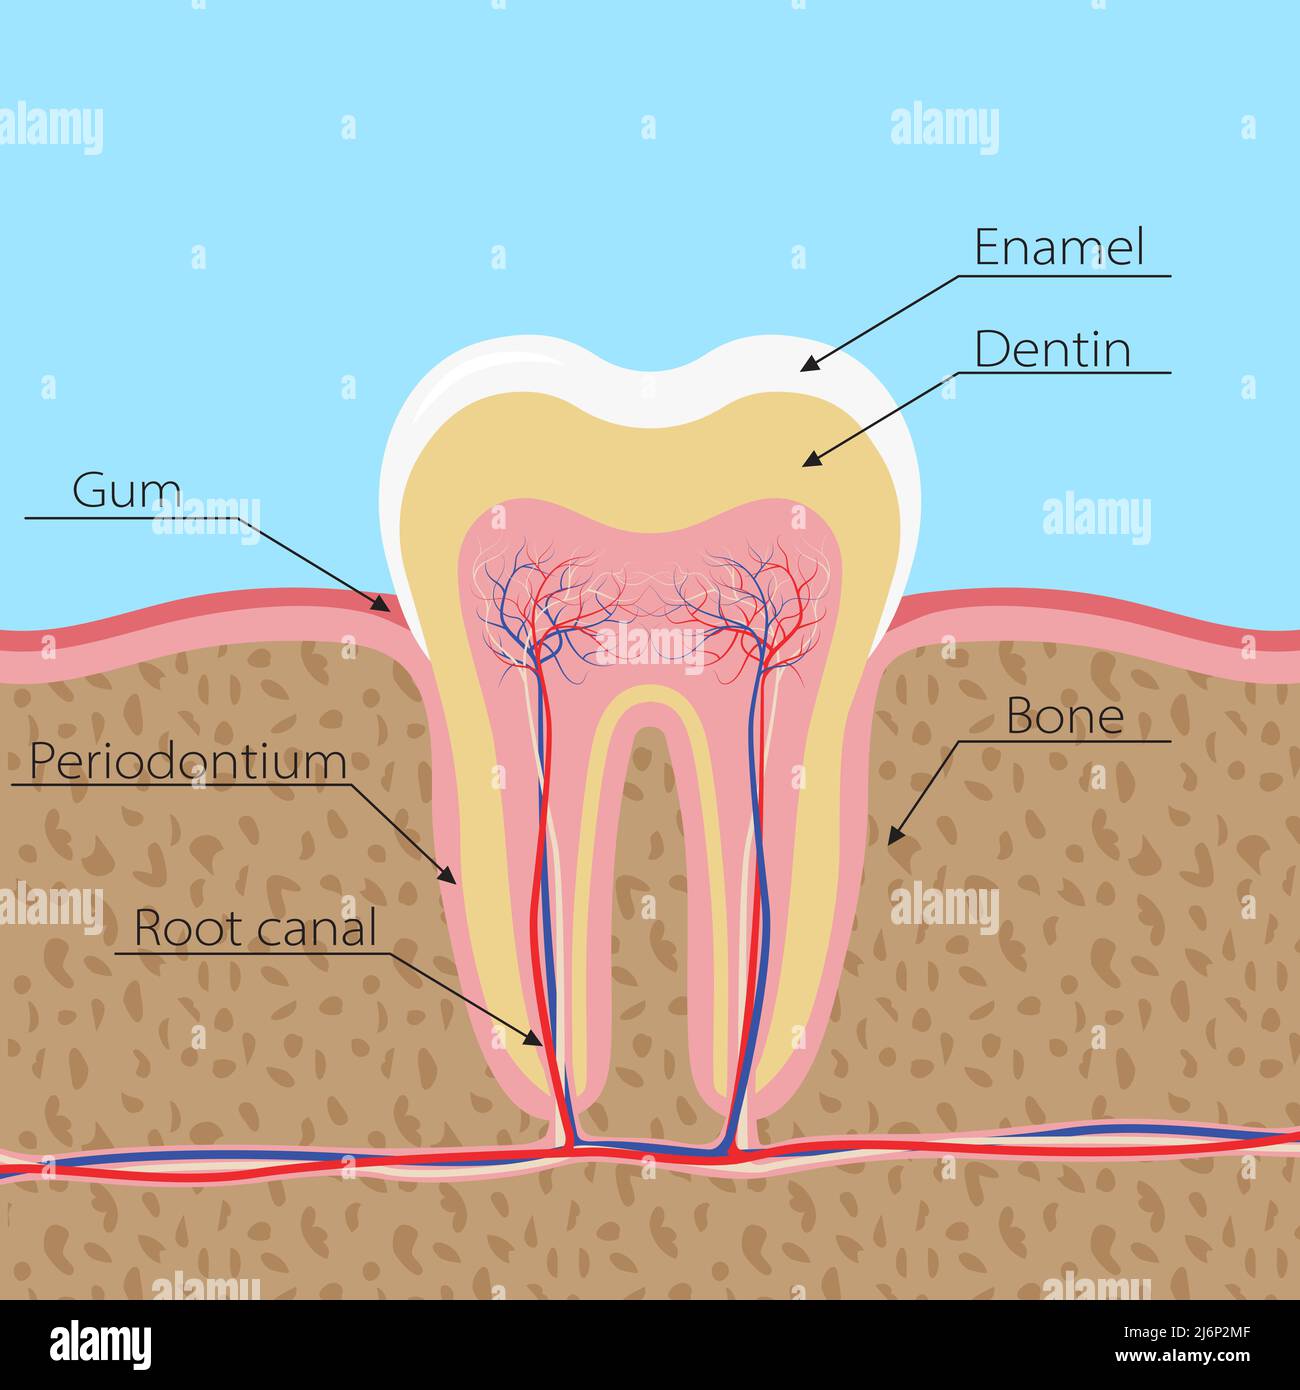 Structure Of The Human Tooth The Tooth Is Incised In The Gum With